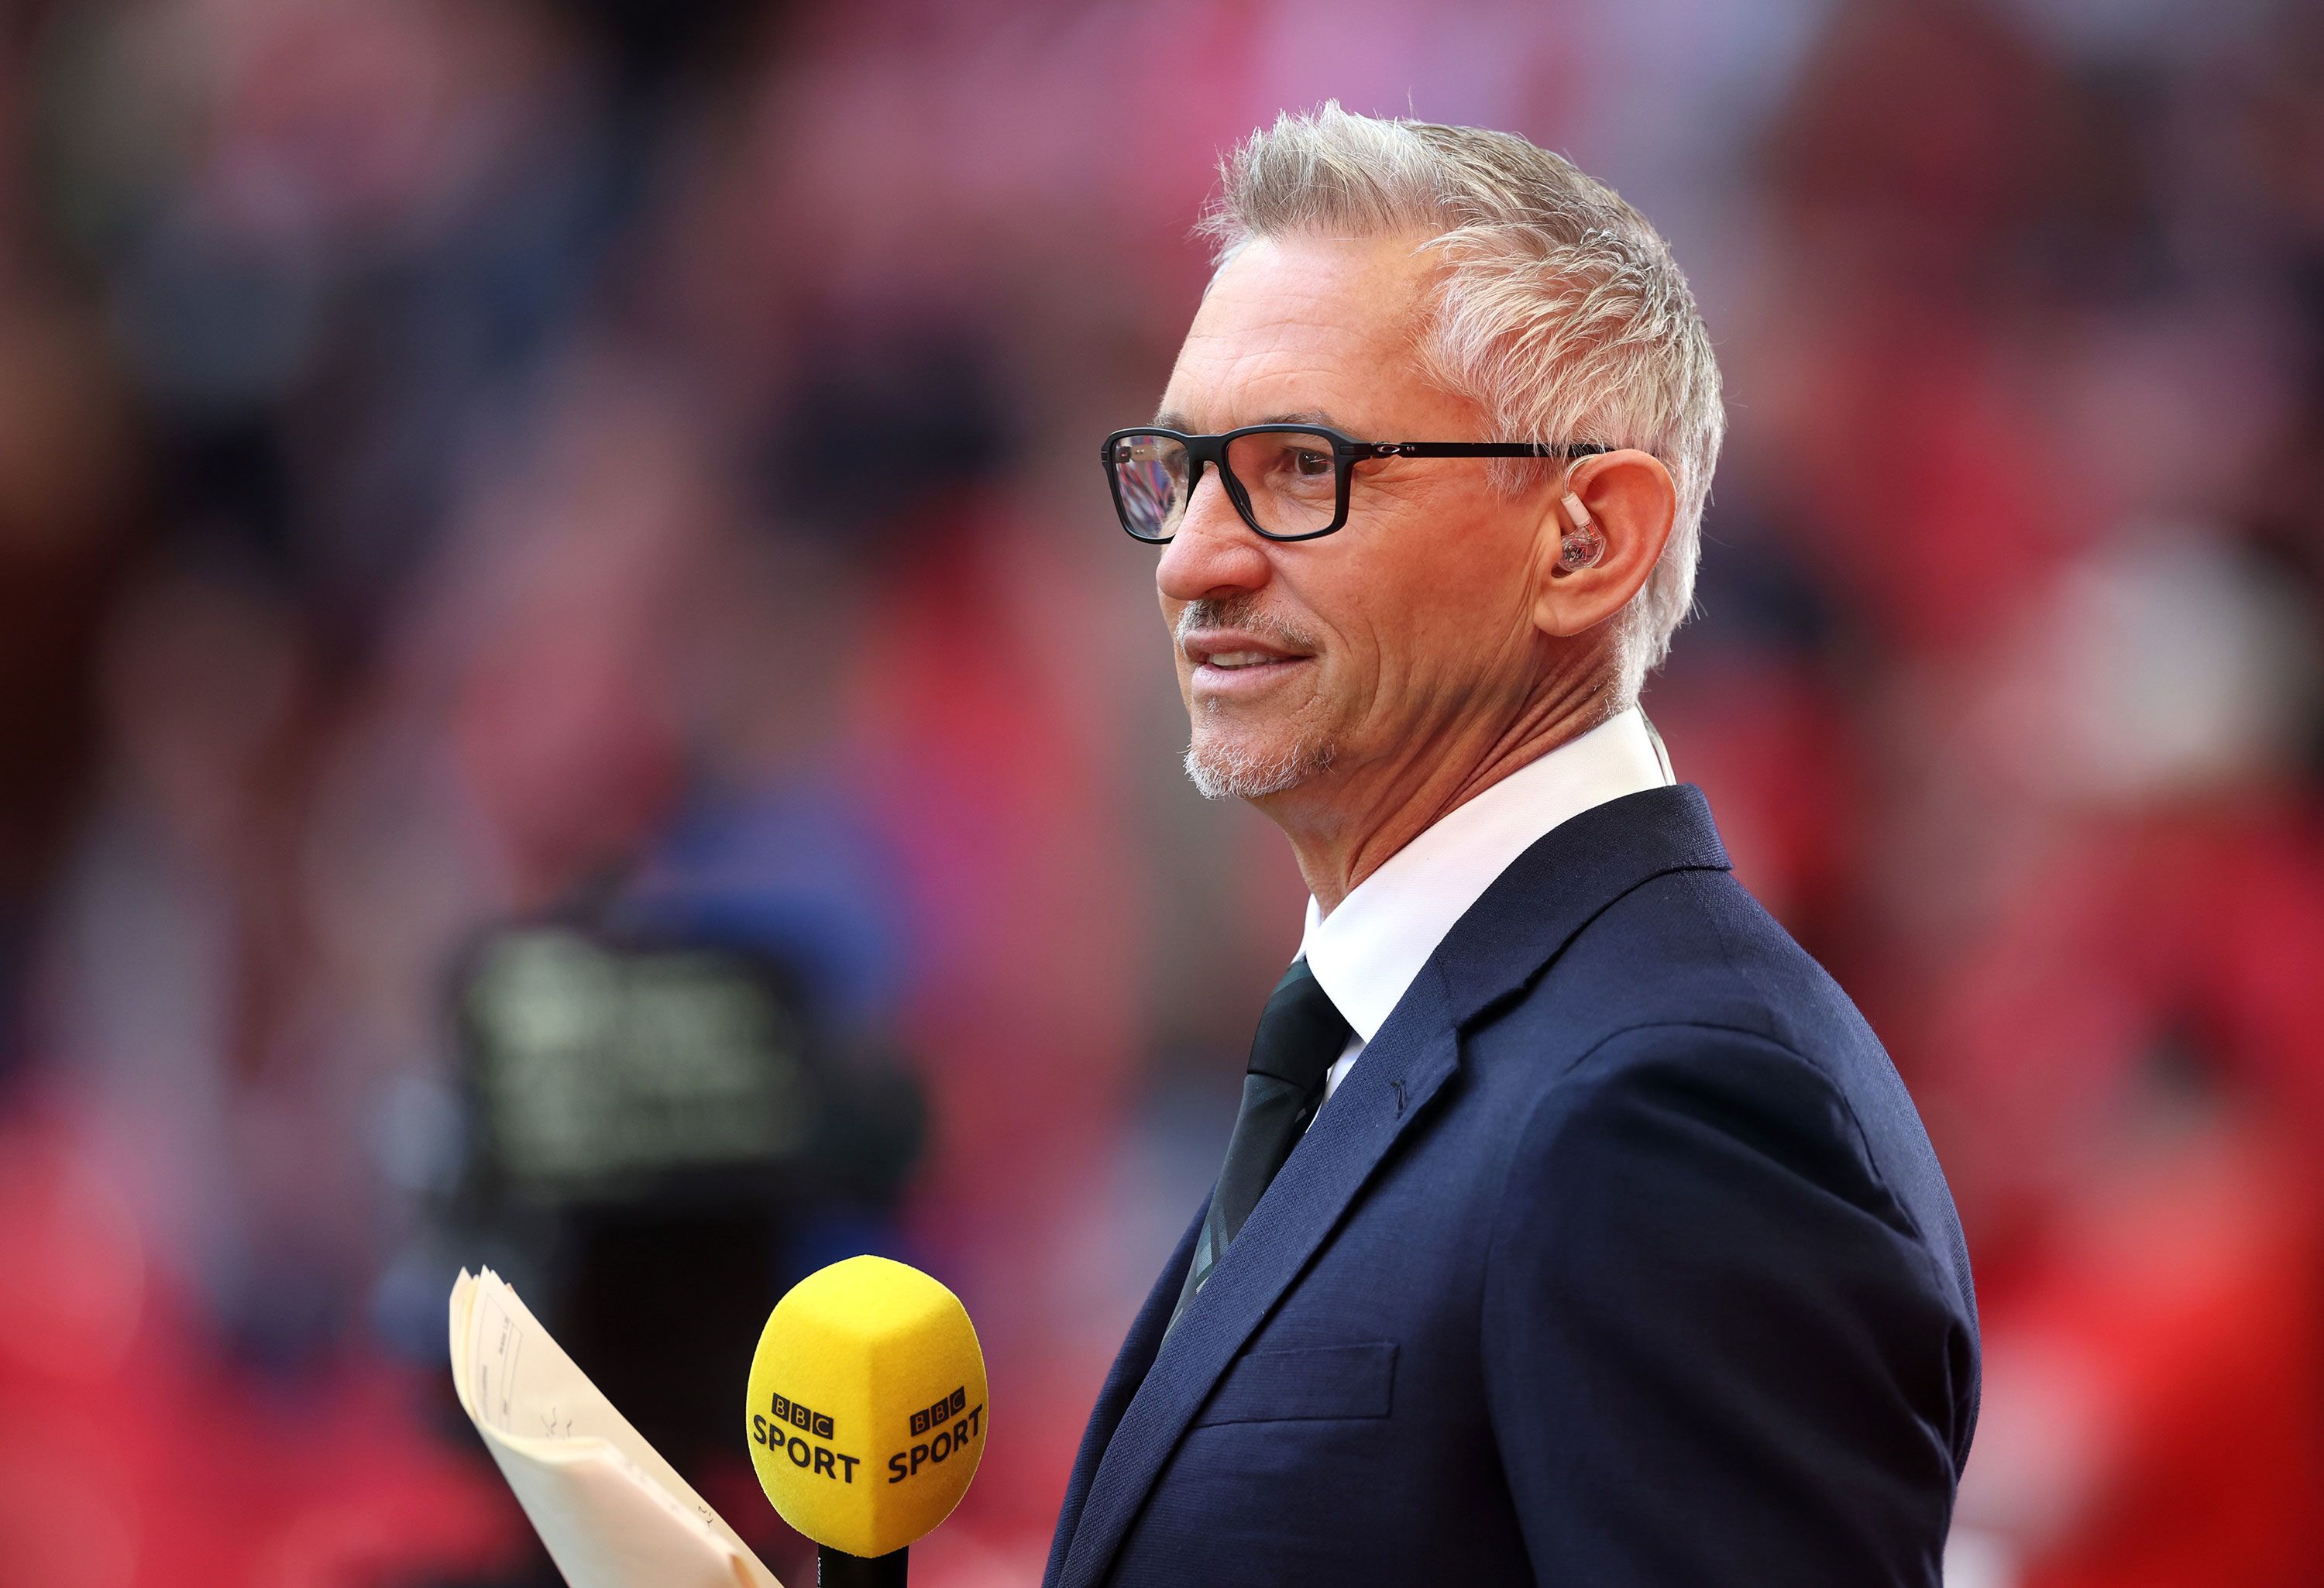 Gary Lineker Pauses Presenting Match Of The Day After Immigration Tweets